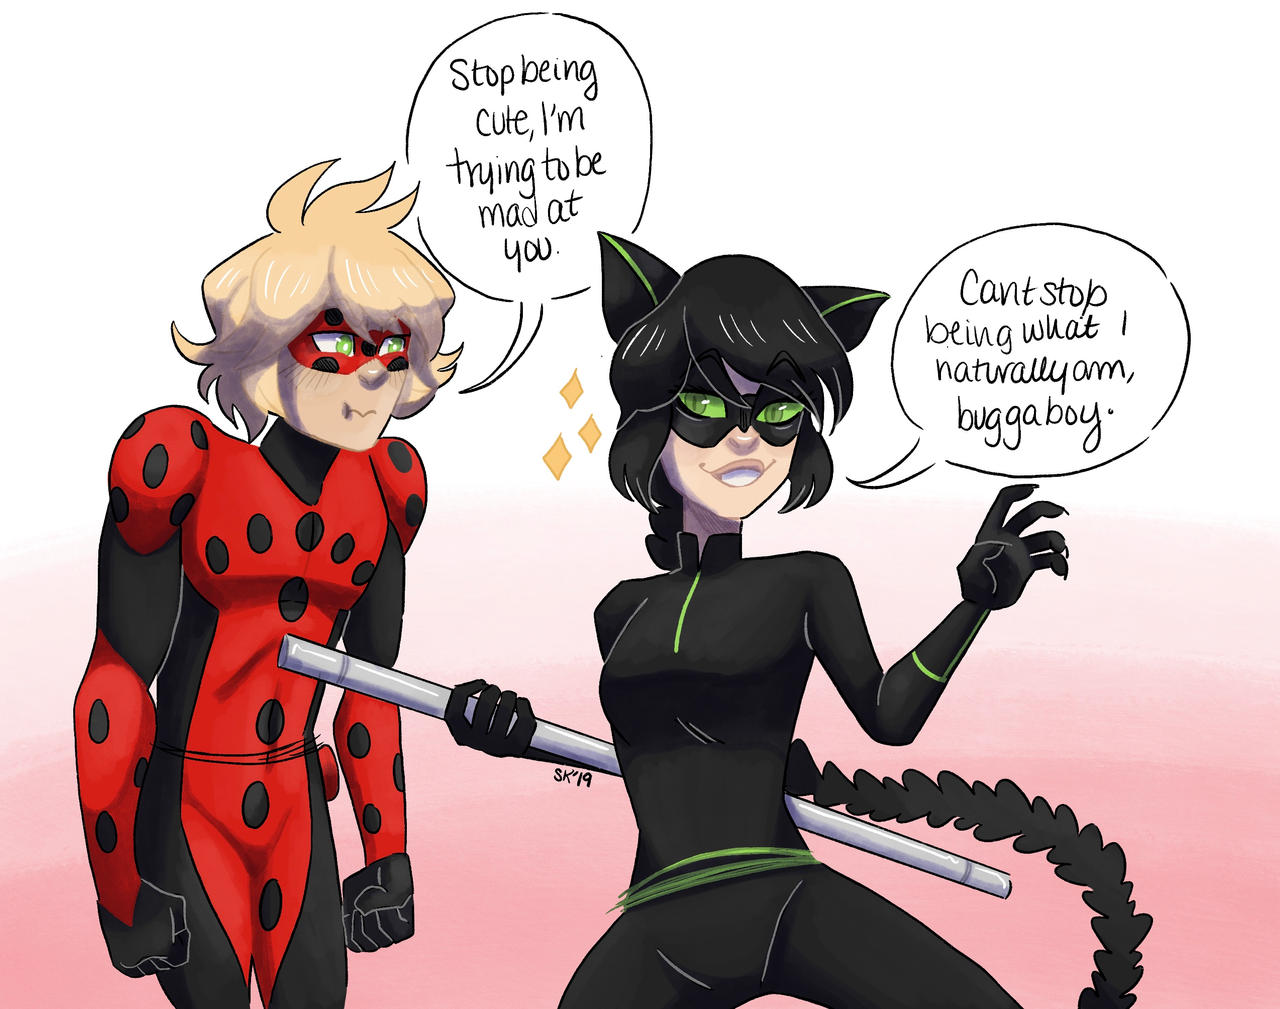 Miraculous Buggaboy Pt.3 by shelbyecandraw on DeviantArt